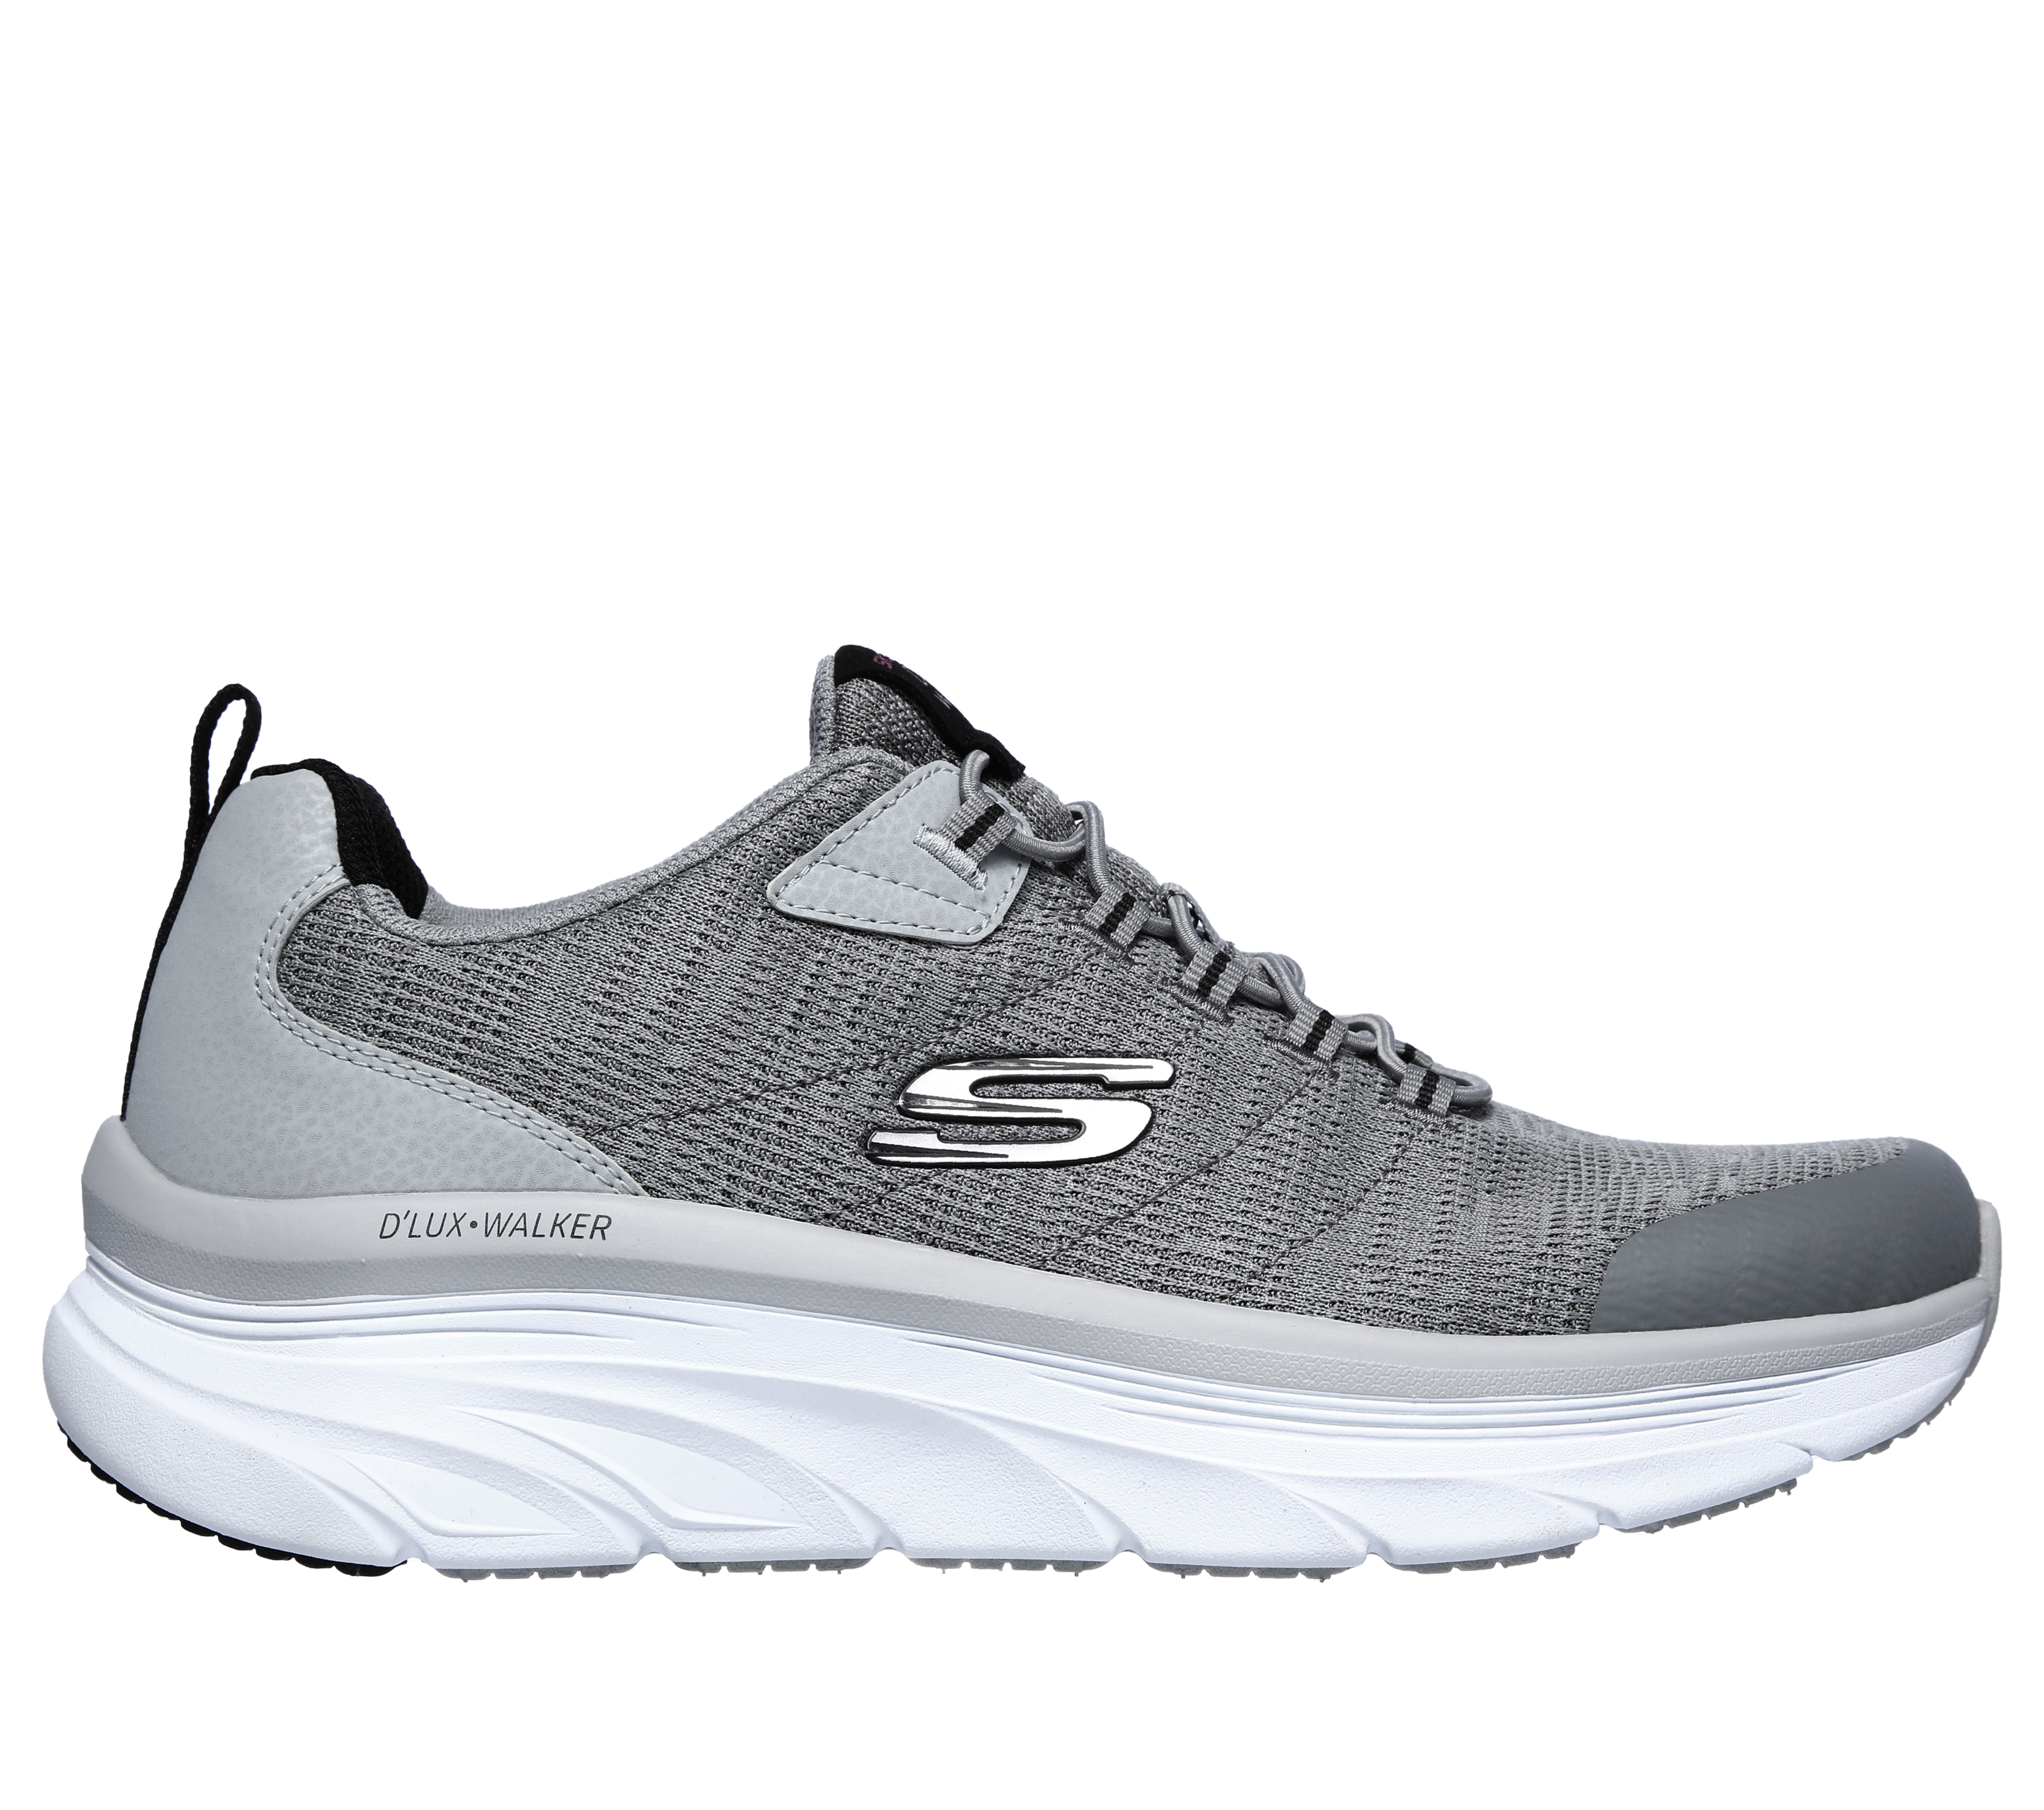 Shop the Relaxed Fit: D'Lux Walker - Pensive | SKECHERS